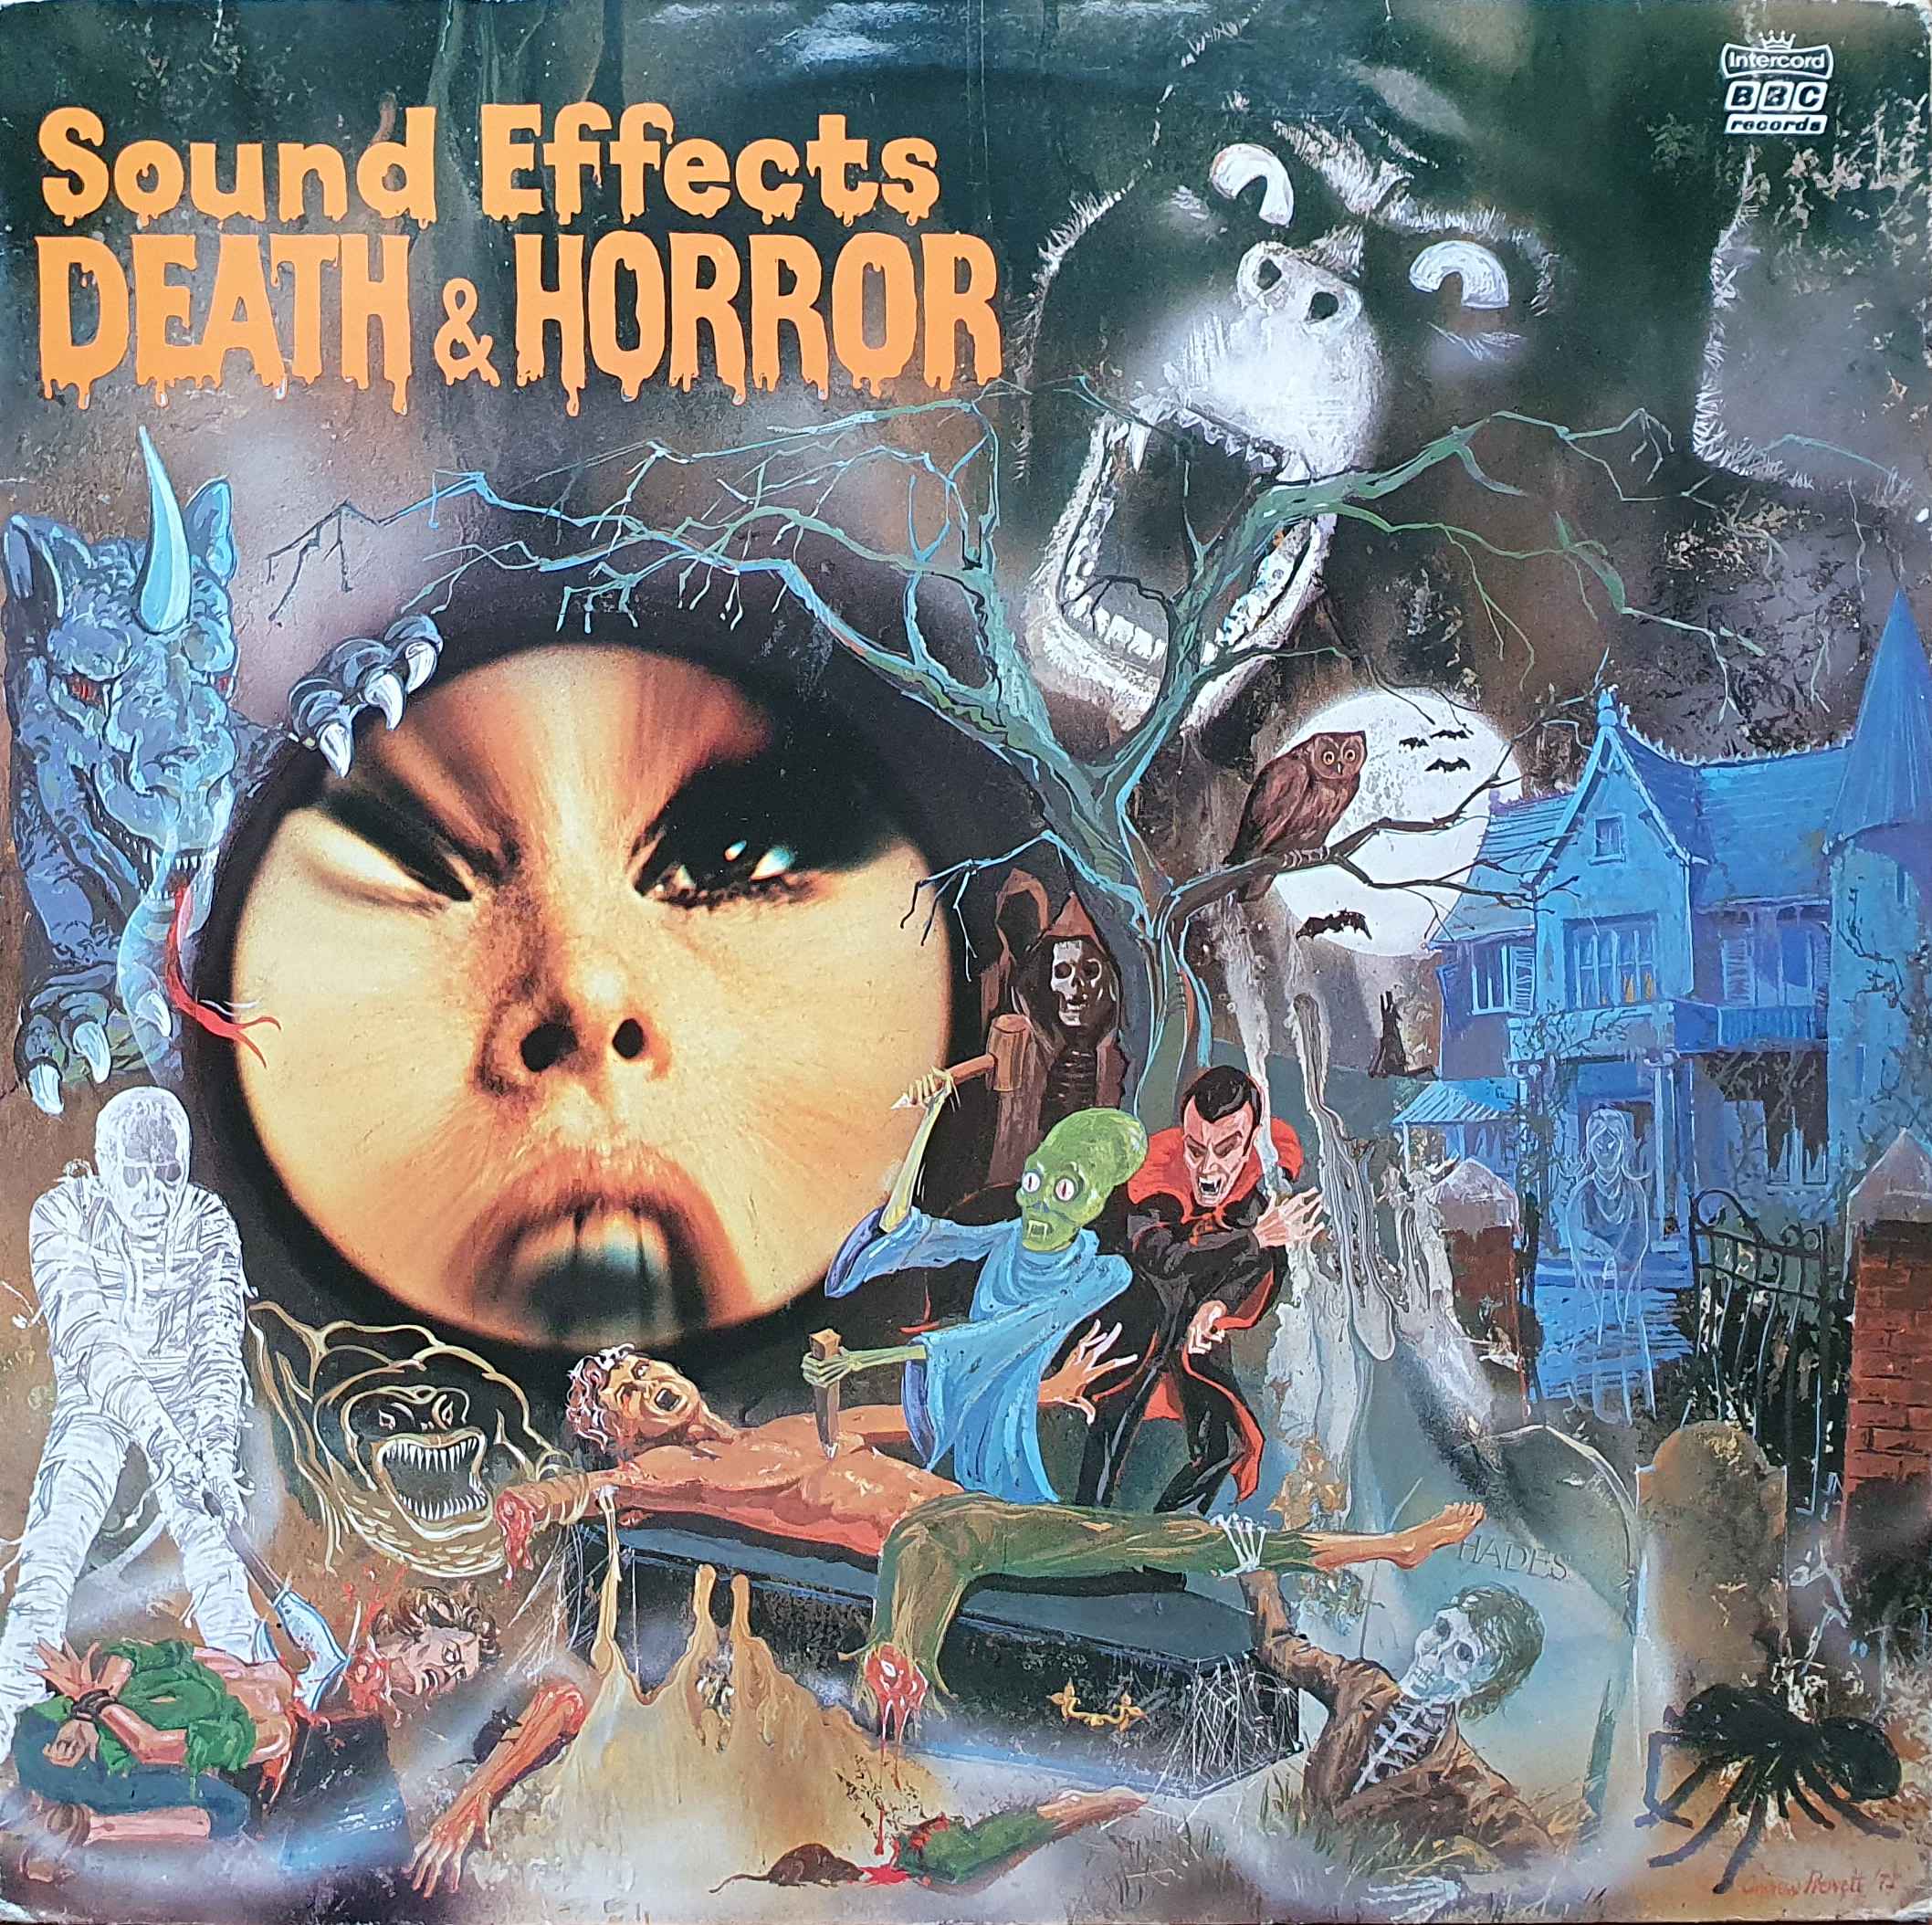 Picture of INT 128.001 Sound effects no. 13 - Death and horror (German import) by artist Mike Harding from the BBC albums - Records and Tapes library